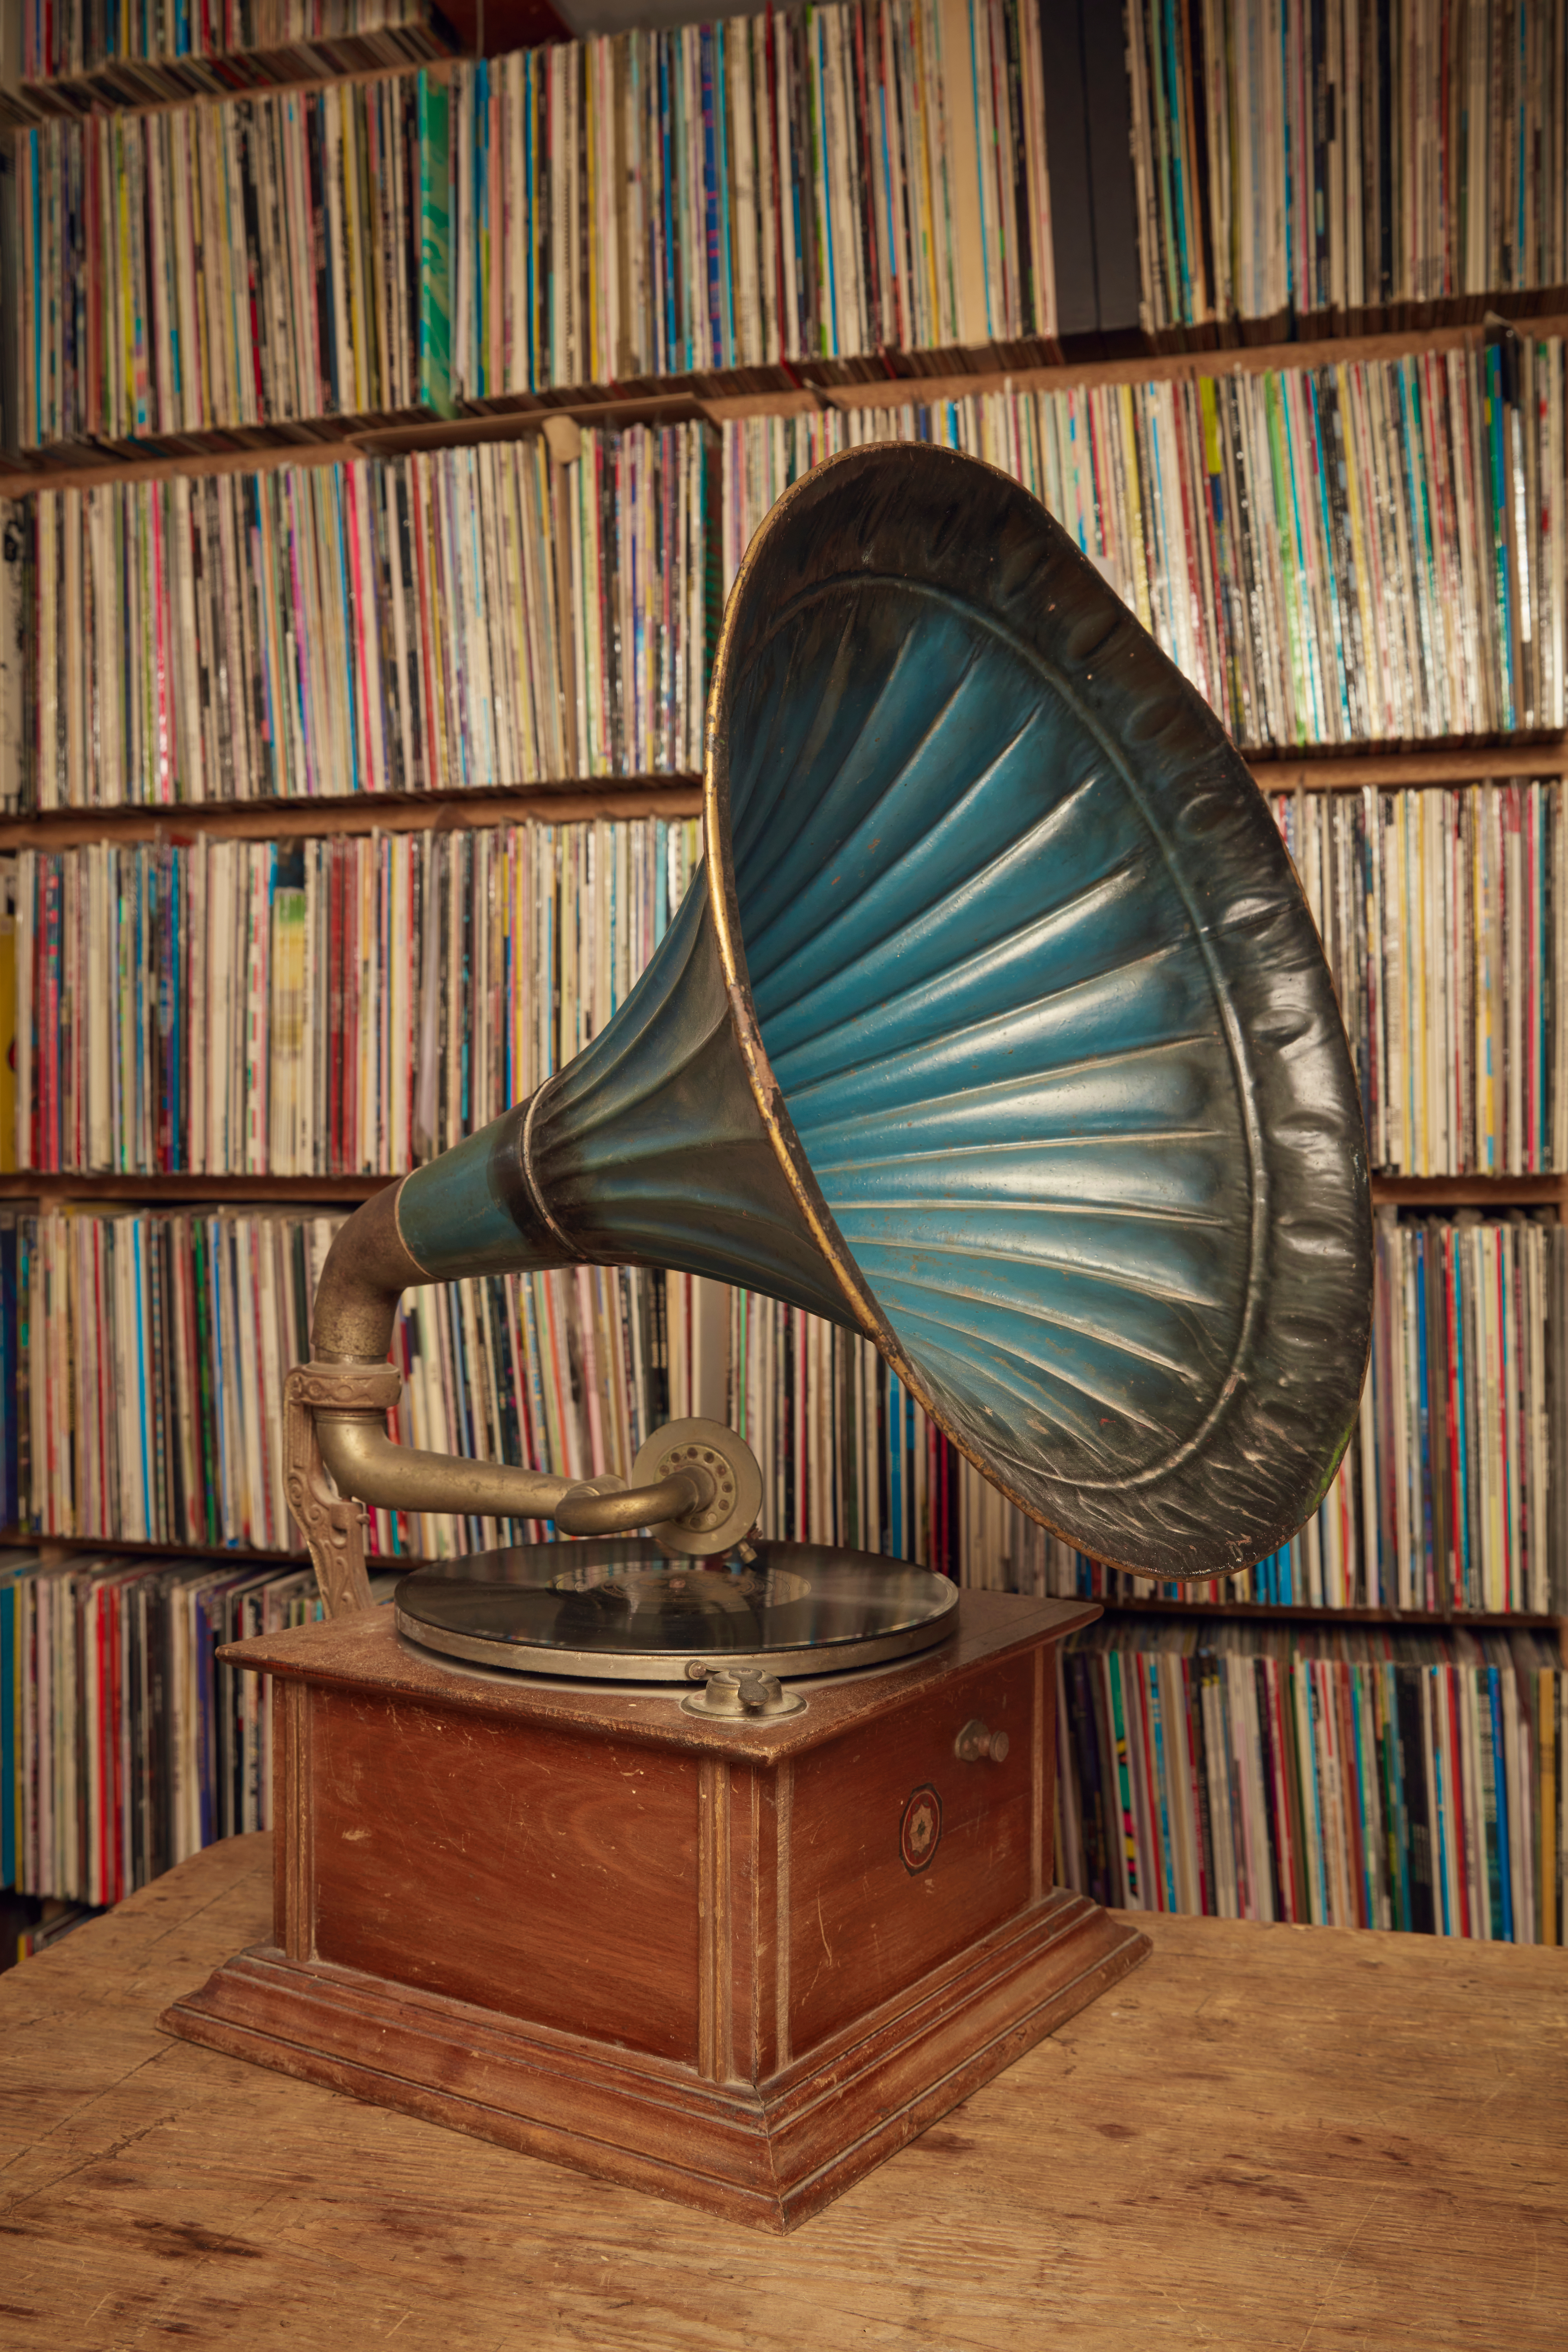 John Peel’s horn gramophone., which has a blue interior and brass exterior